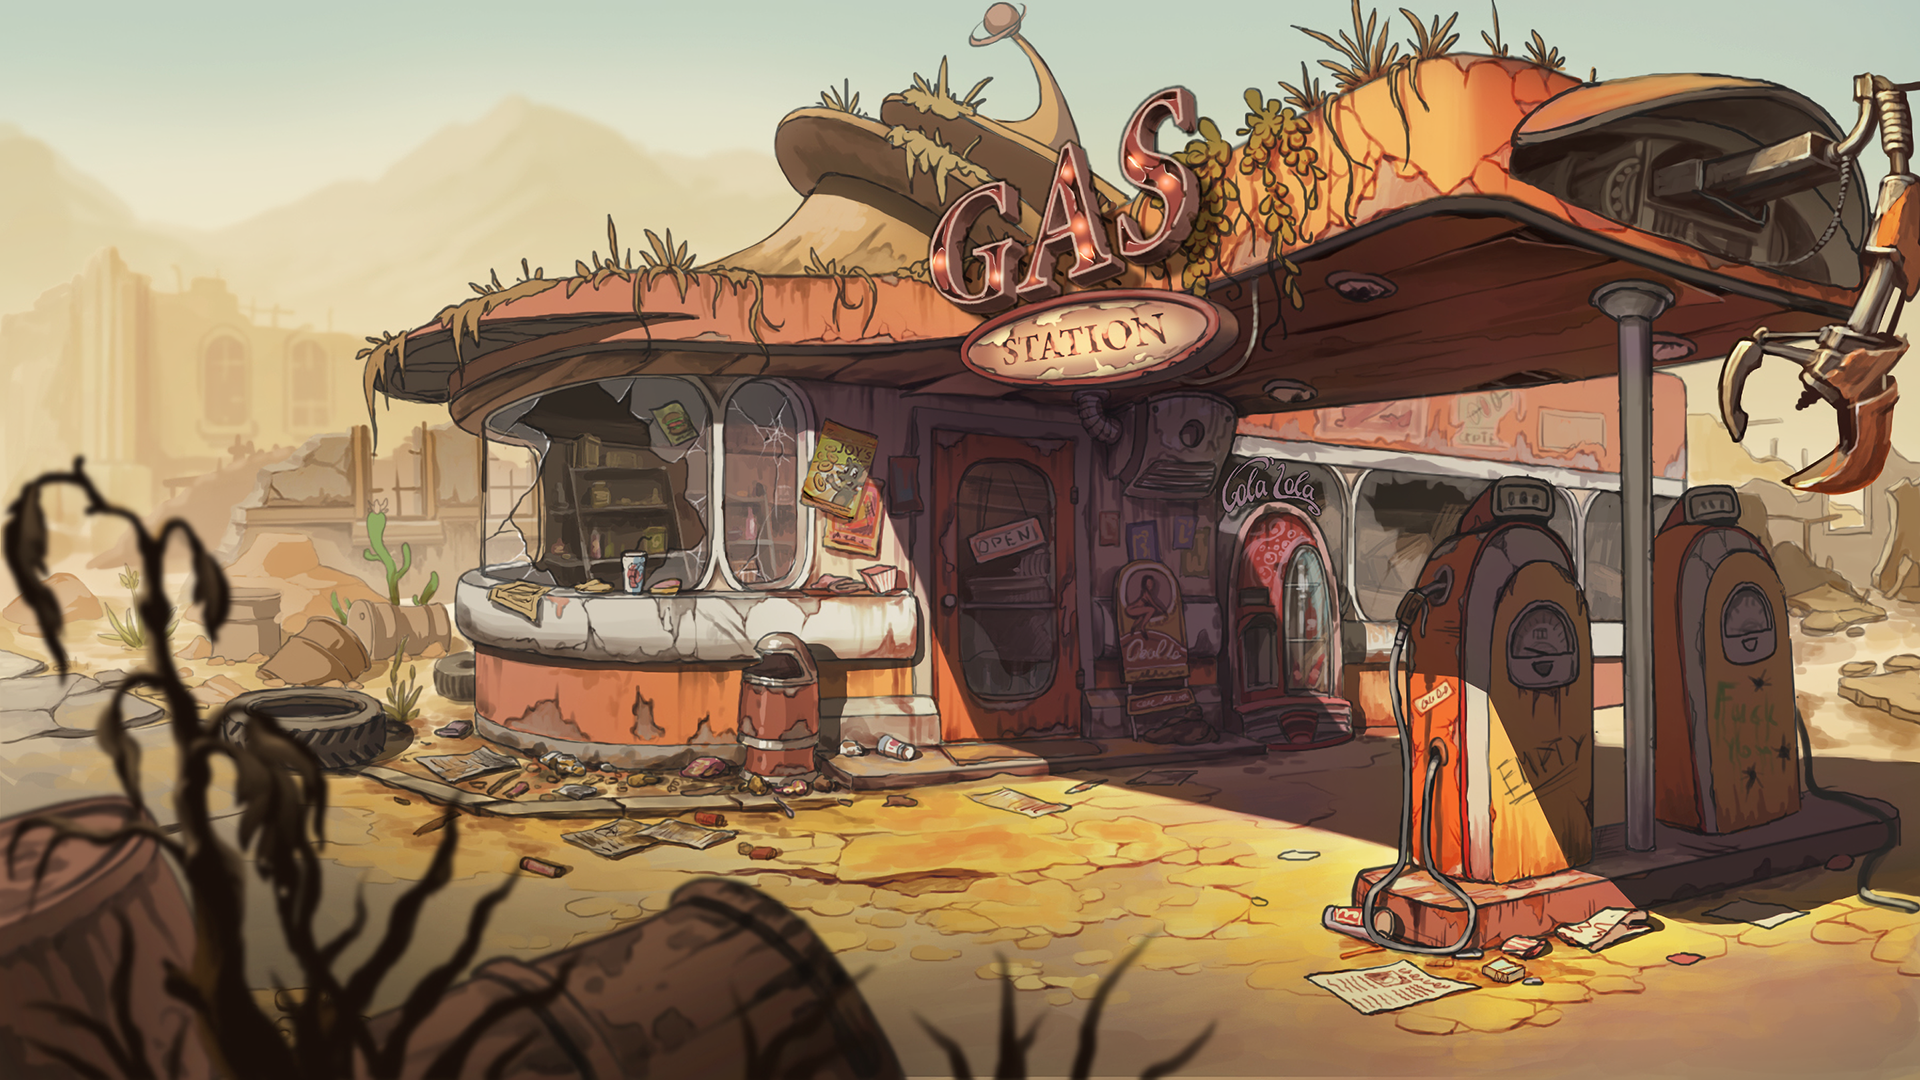 Gas Station Post Apocalyptic 1920x1080